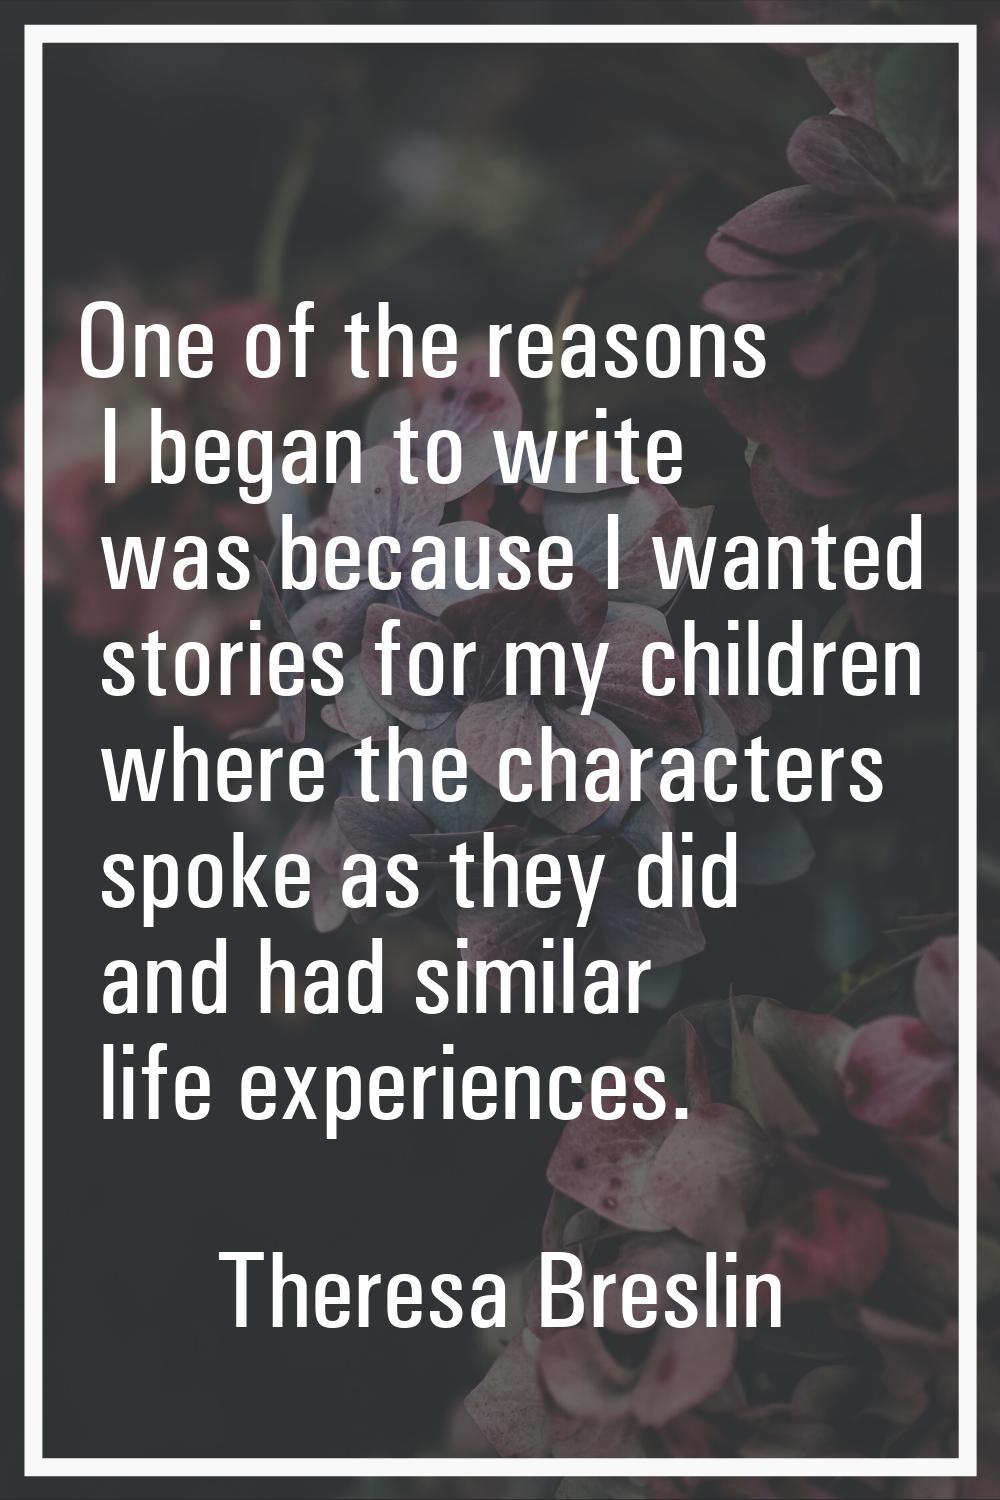 One of the reasons I began to write was because I wanted stories for my children where the characte